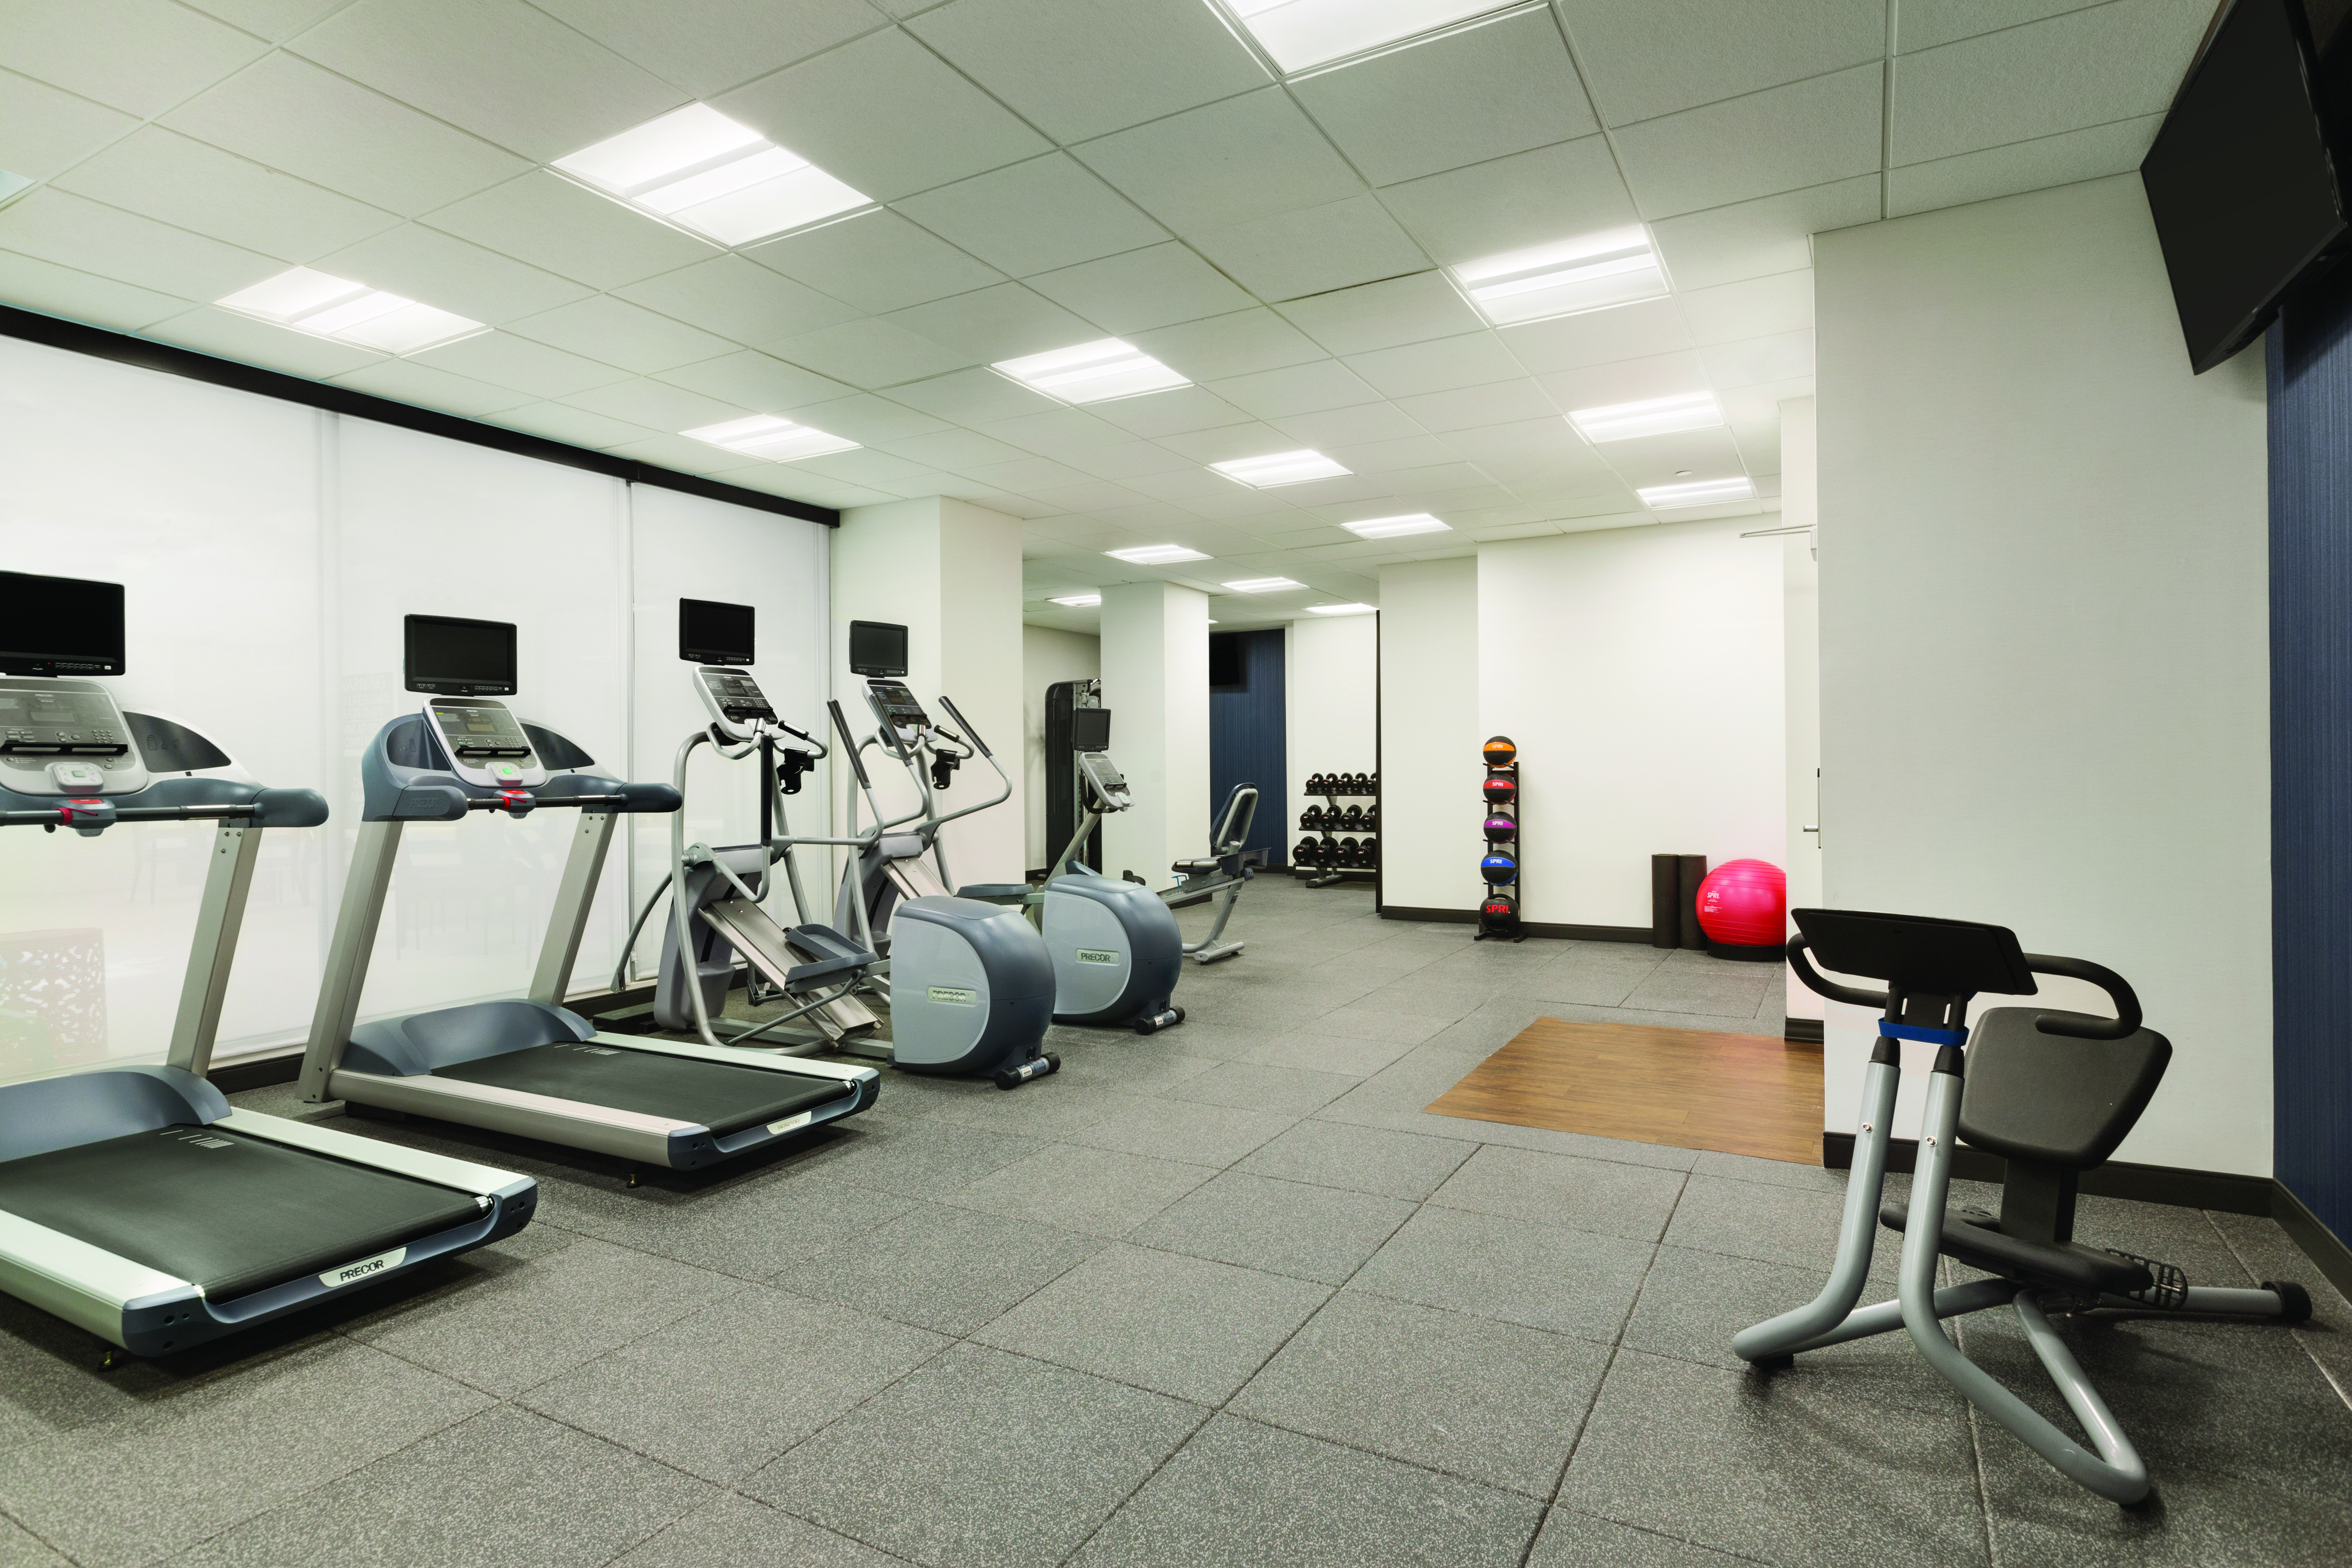 Fitness Center With Cardio Equipment, Free Weights, Weight Balls, Exercise Ball, and TVFitness Center with Ellipticals, Treadmills and Other Equipment